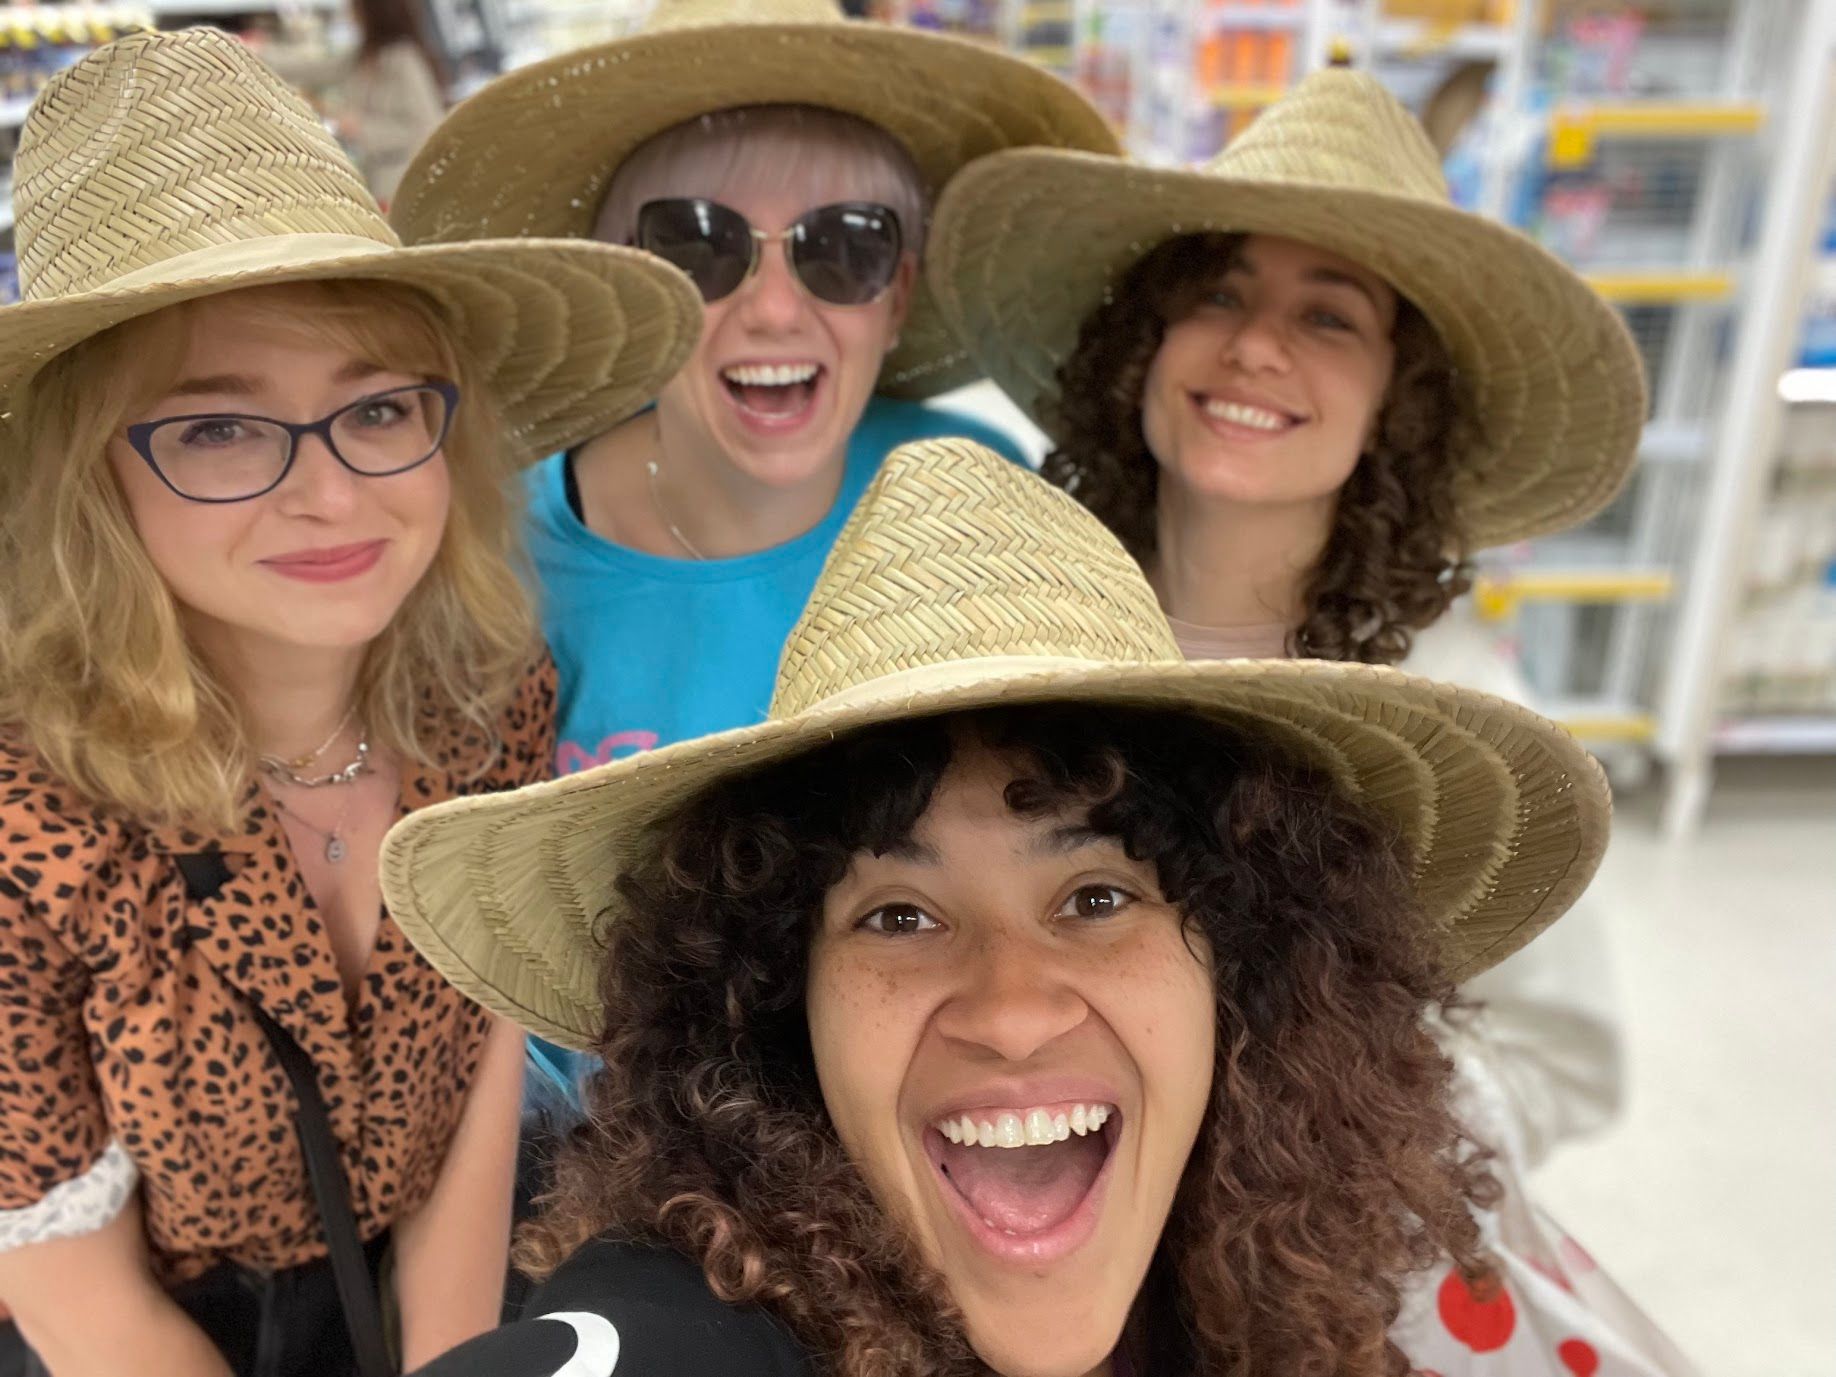 A photo with four of the Cliniko team visiting a shop, wearing matching straw hats